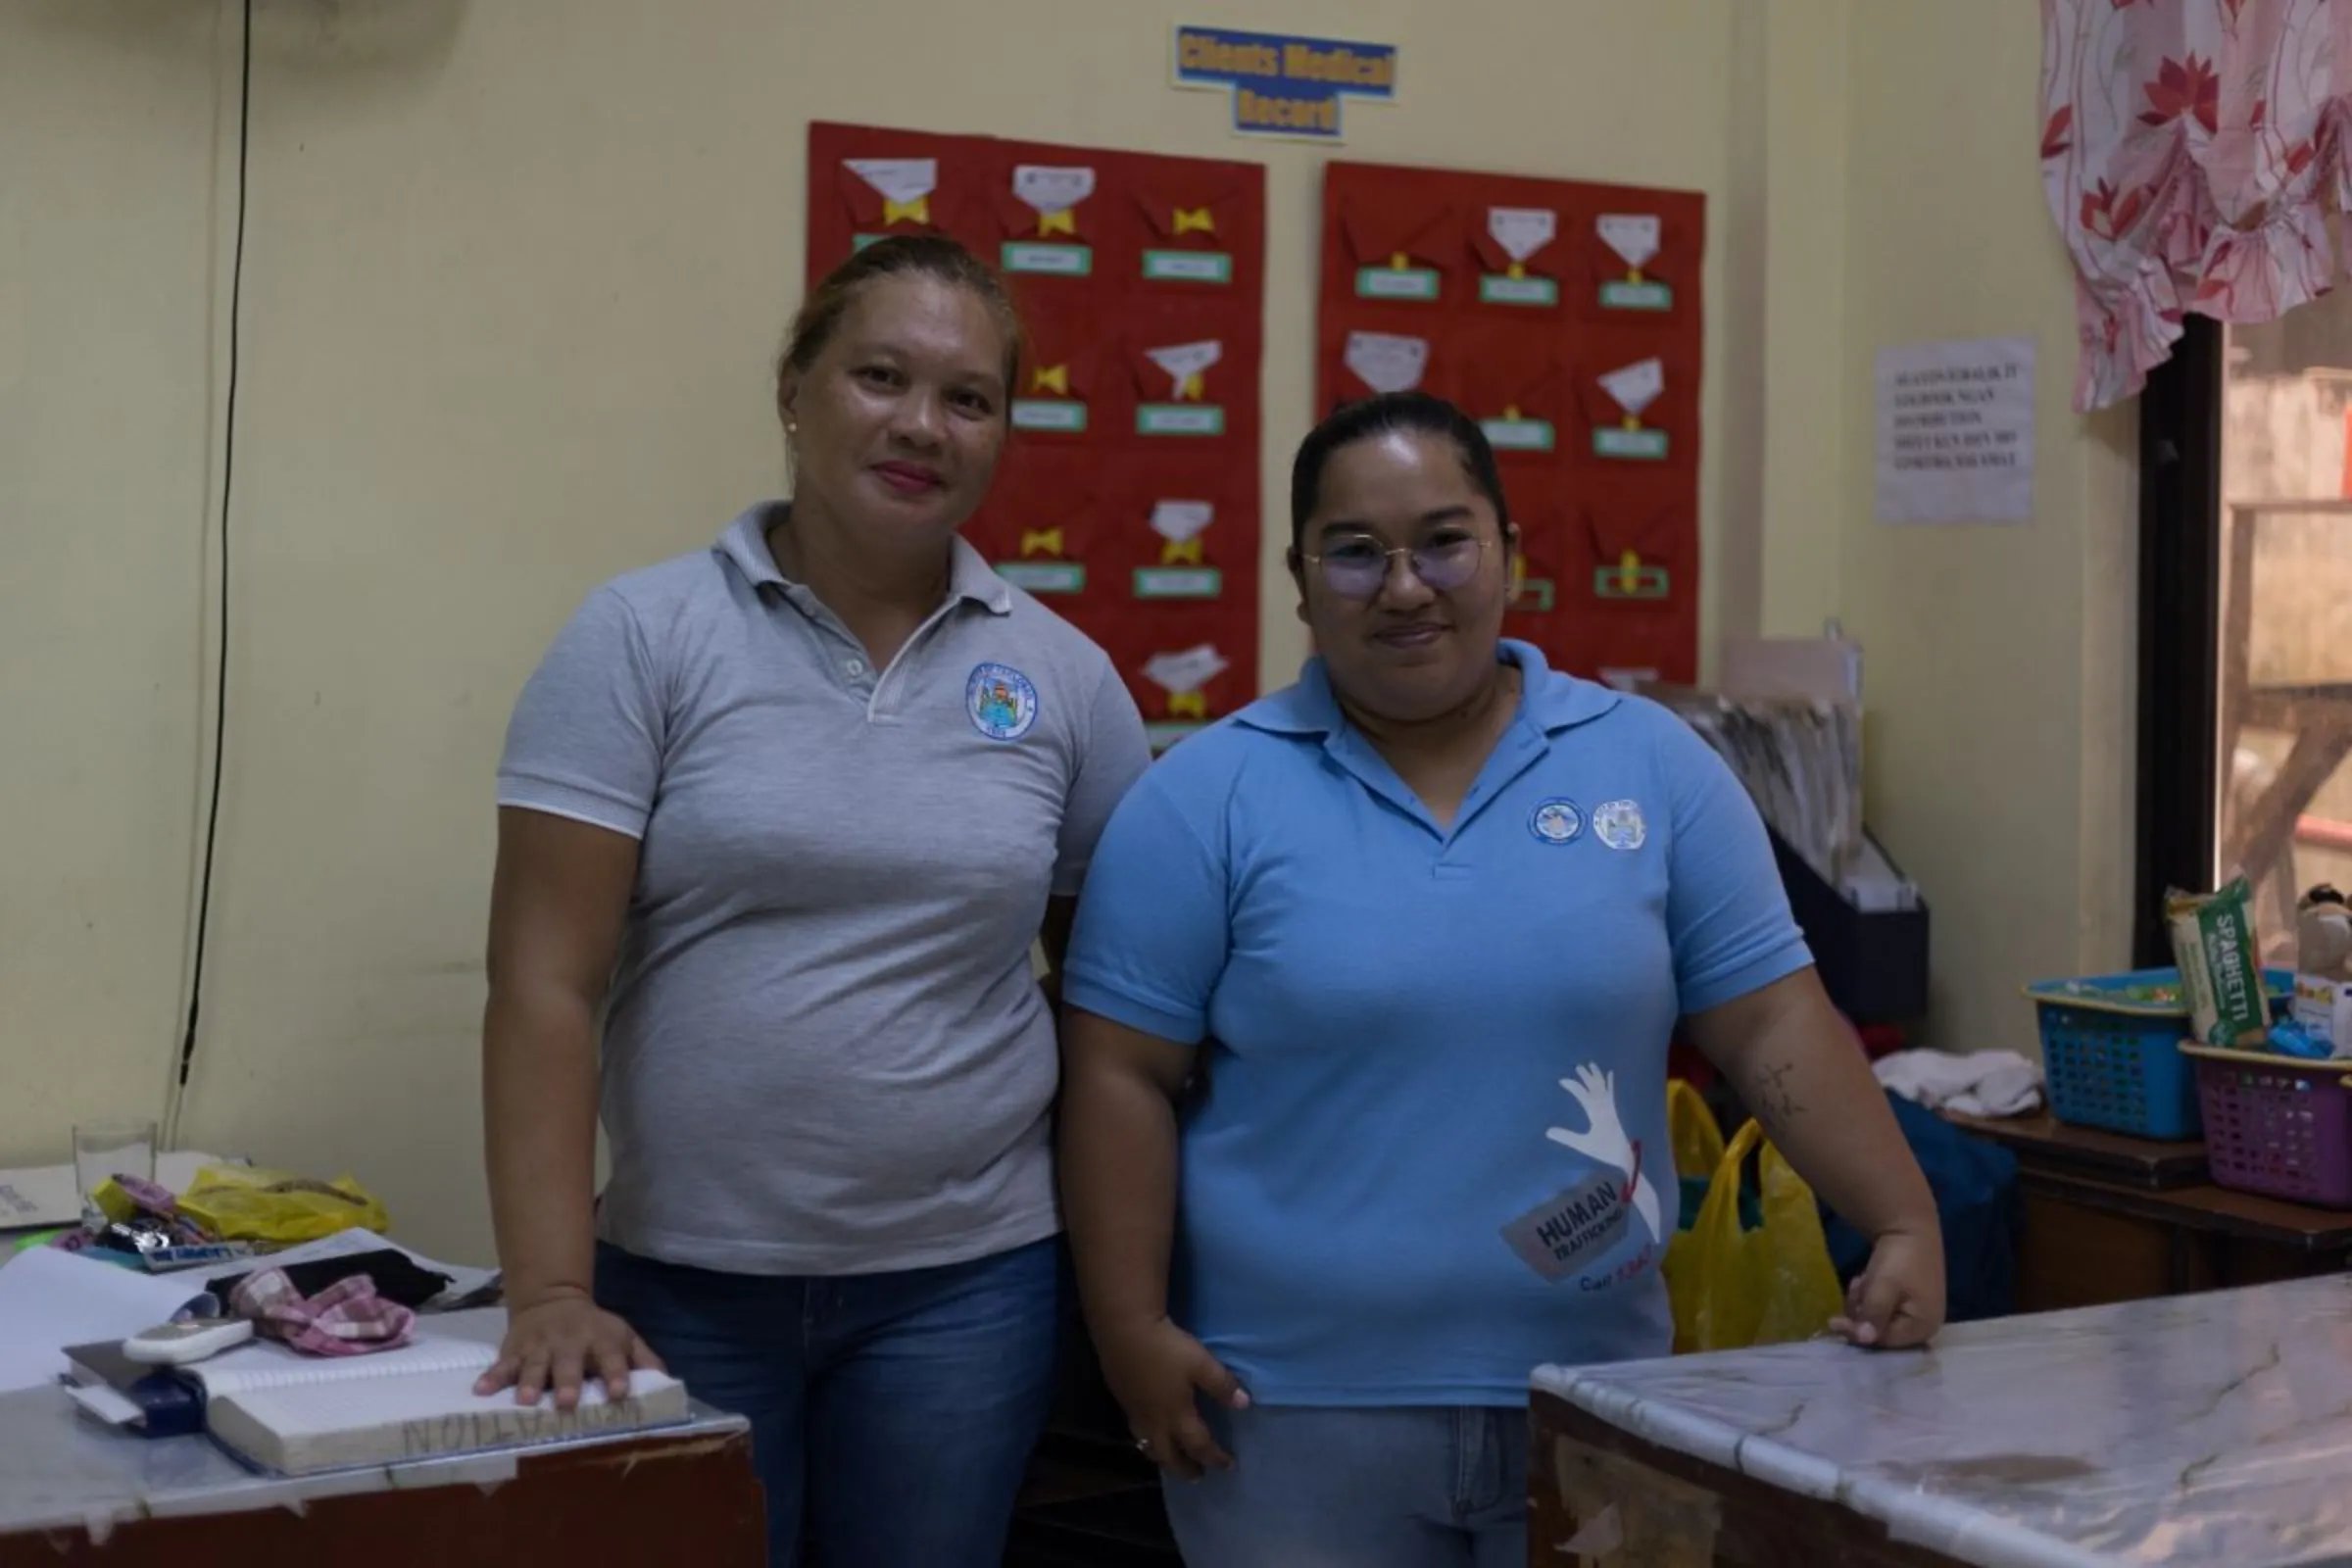 Social worker Jerimae Coringcoting (right) poses with a house parent inside the shelter (left), Tacloban City, Philippines. October 9, 2023. Thomson Reuters Foundation/Kathleen Limayo